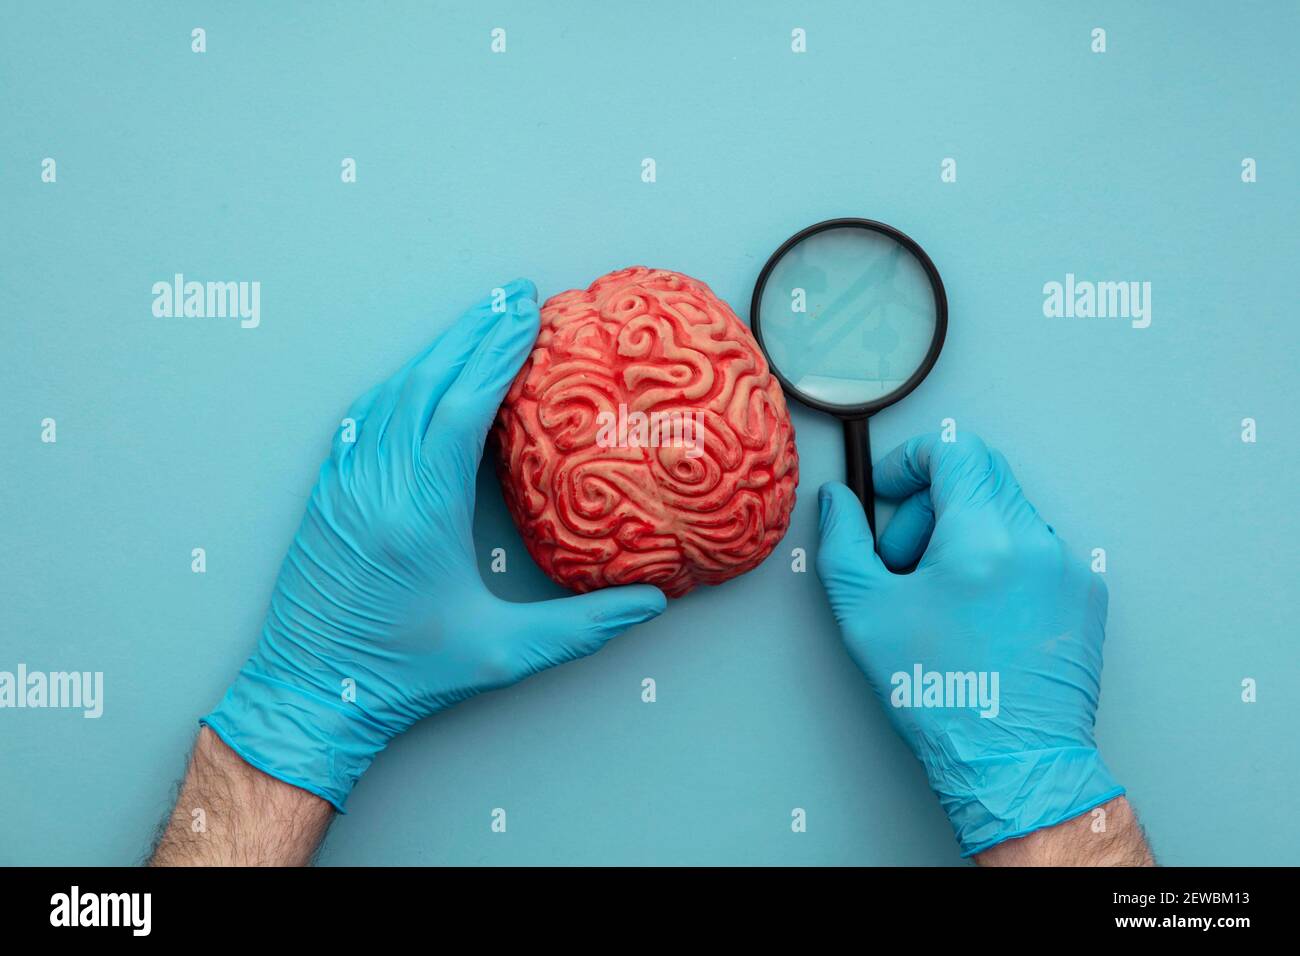 Doctor using a magnifying glass to look at a brain. Mental health concept Stock Photo